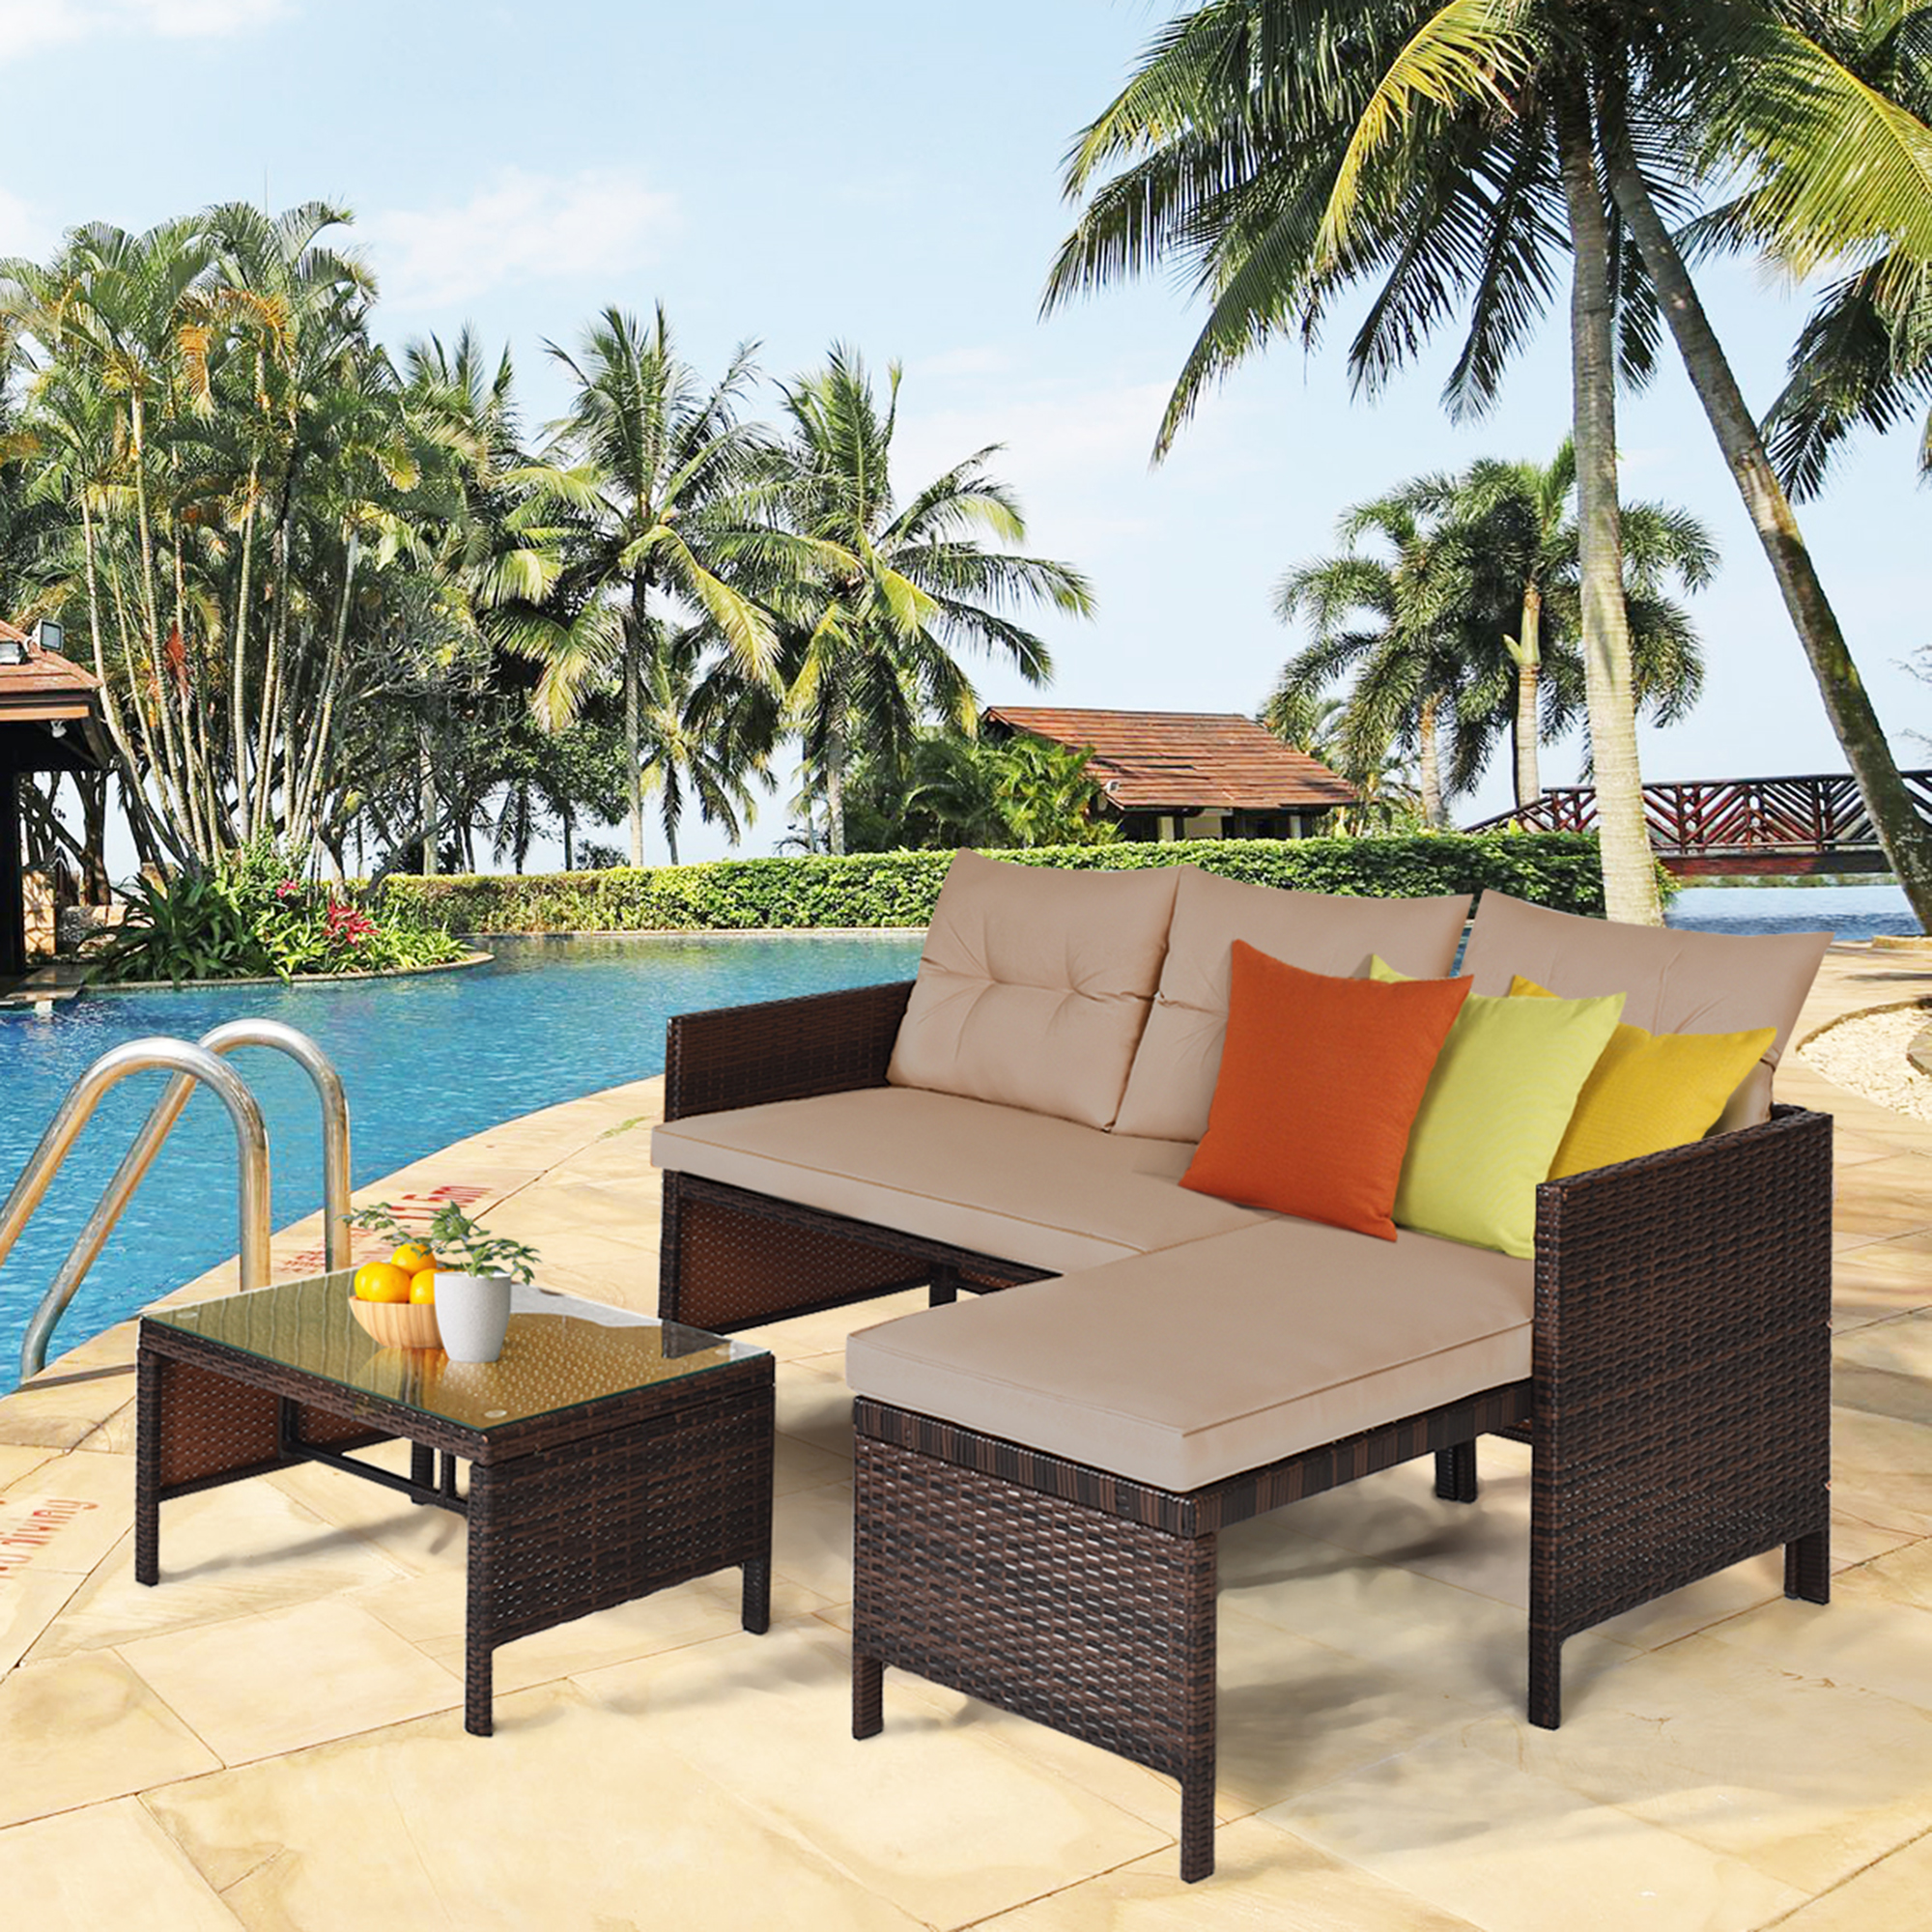 Gymax 3PCS Outdoor Rattan Furniture Set Patio Couch Sofa Set w/ Coffee Table - image 3 of 10